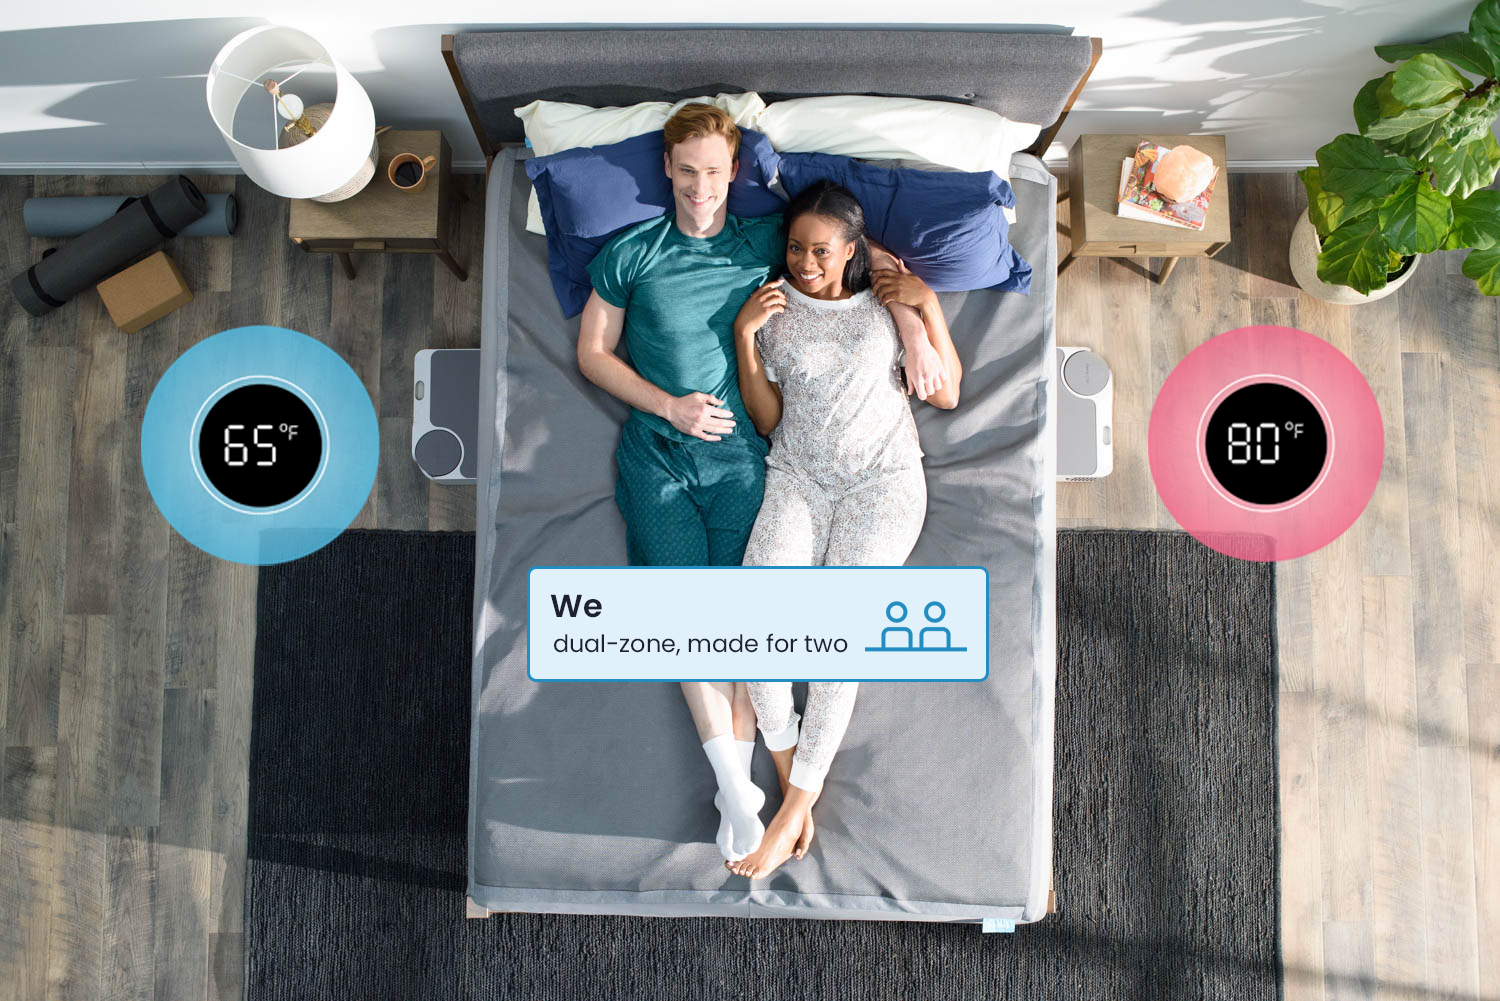 features and benefits of the dock pro sleep system